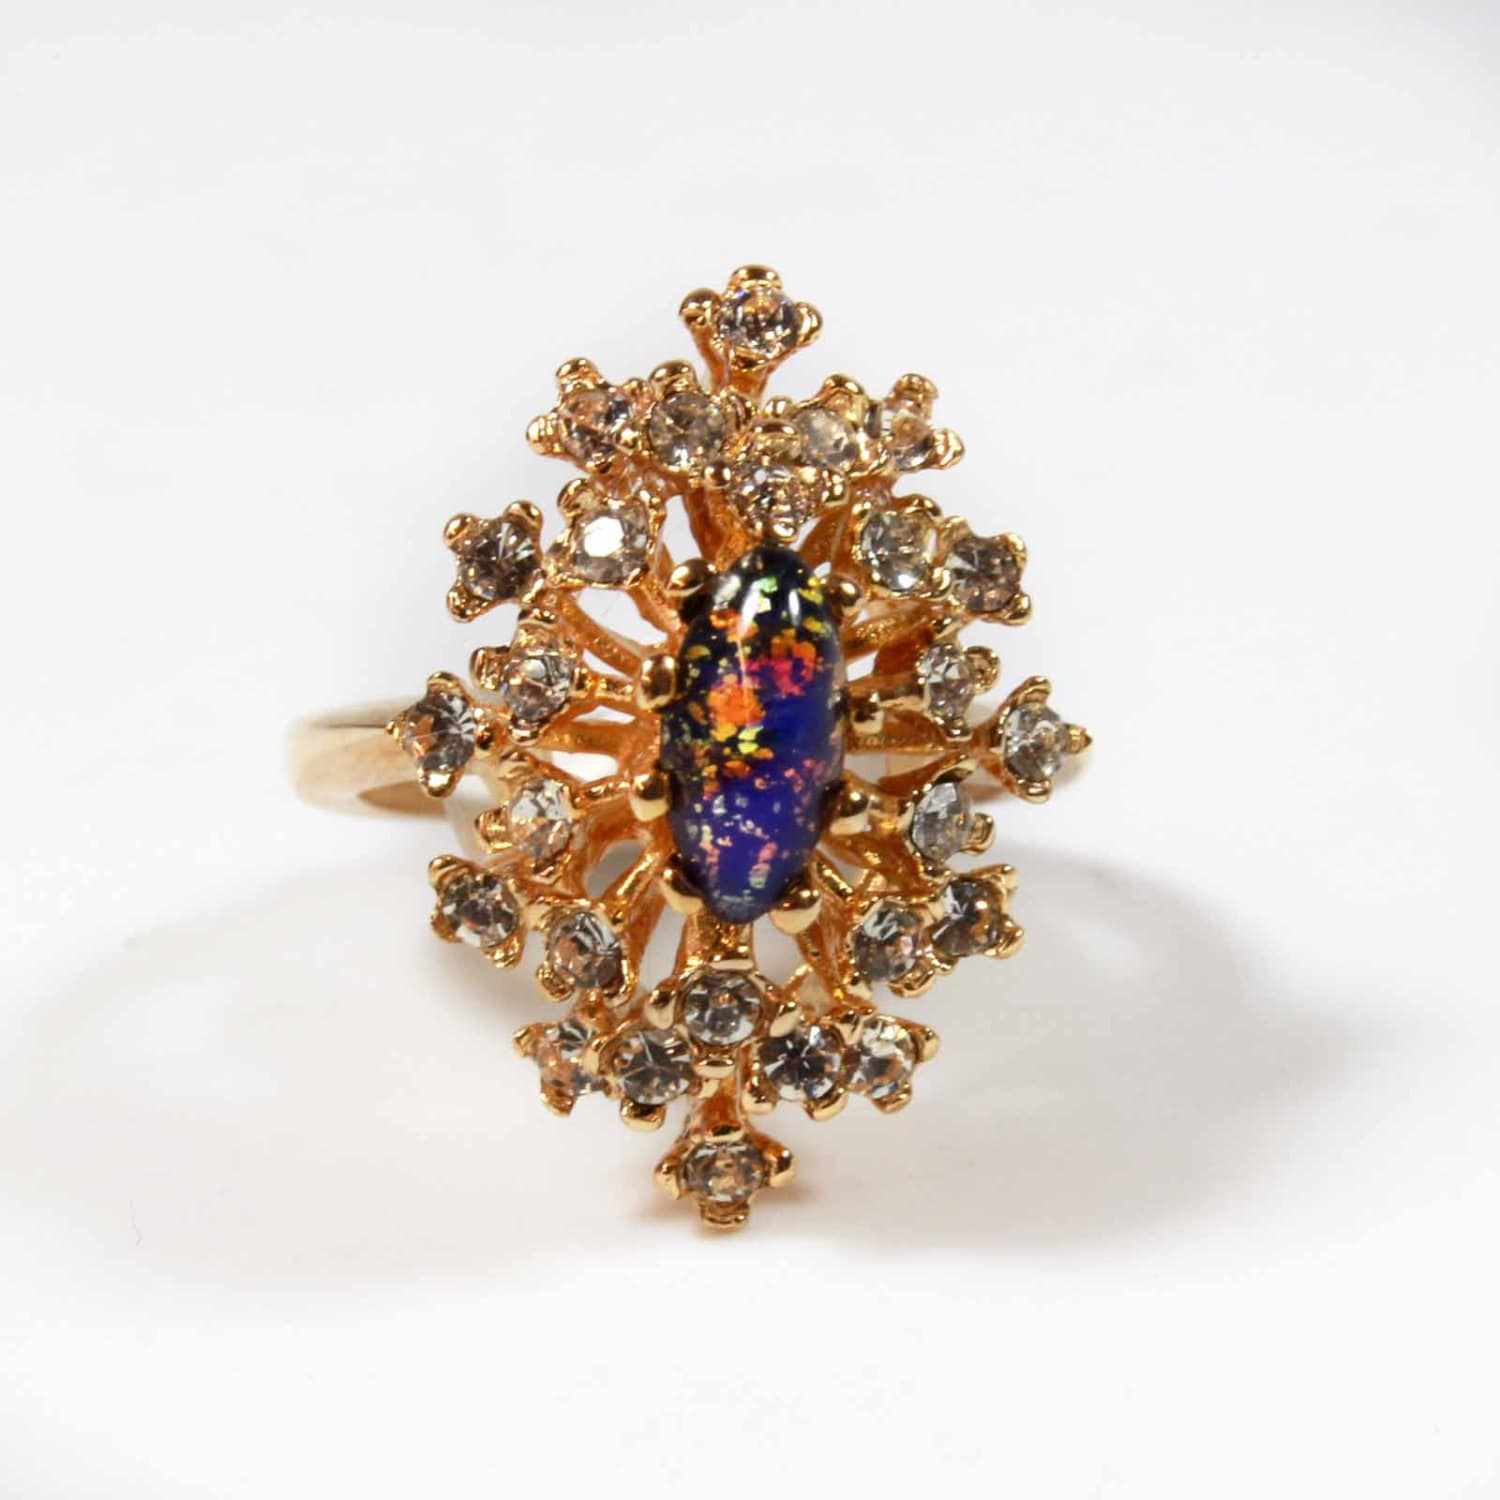 Vintage Ring 1970s Harlequin Opal Clear Swarovski Crystals 18kt Gold Cocktail Ring Antique Womans Jewlery #R221 - Limited Stock - Never Worn